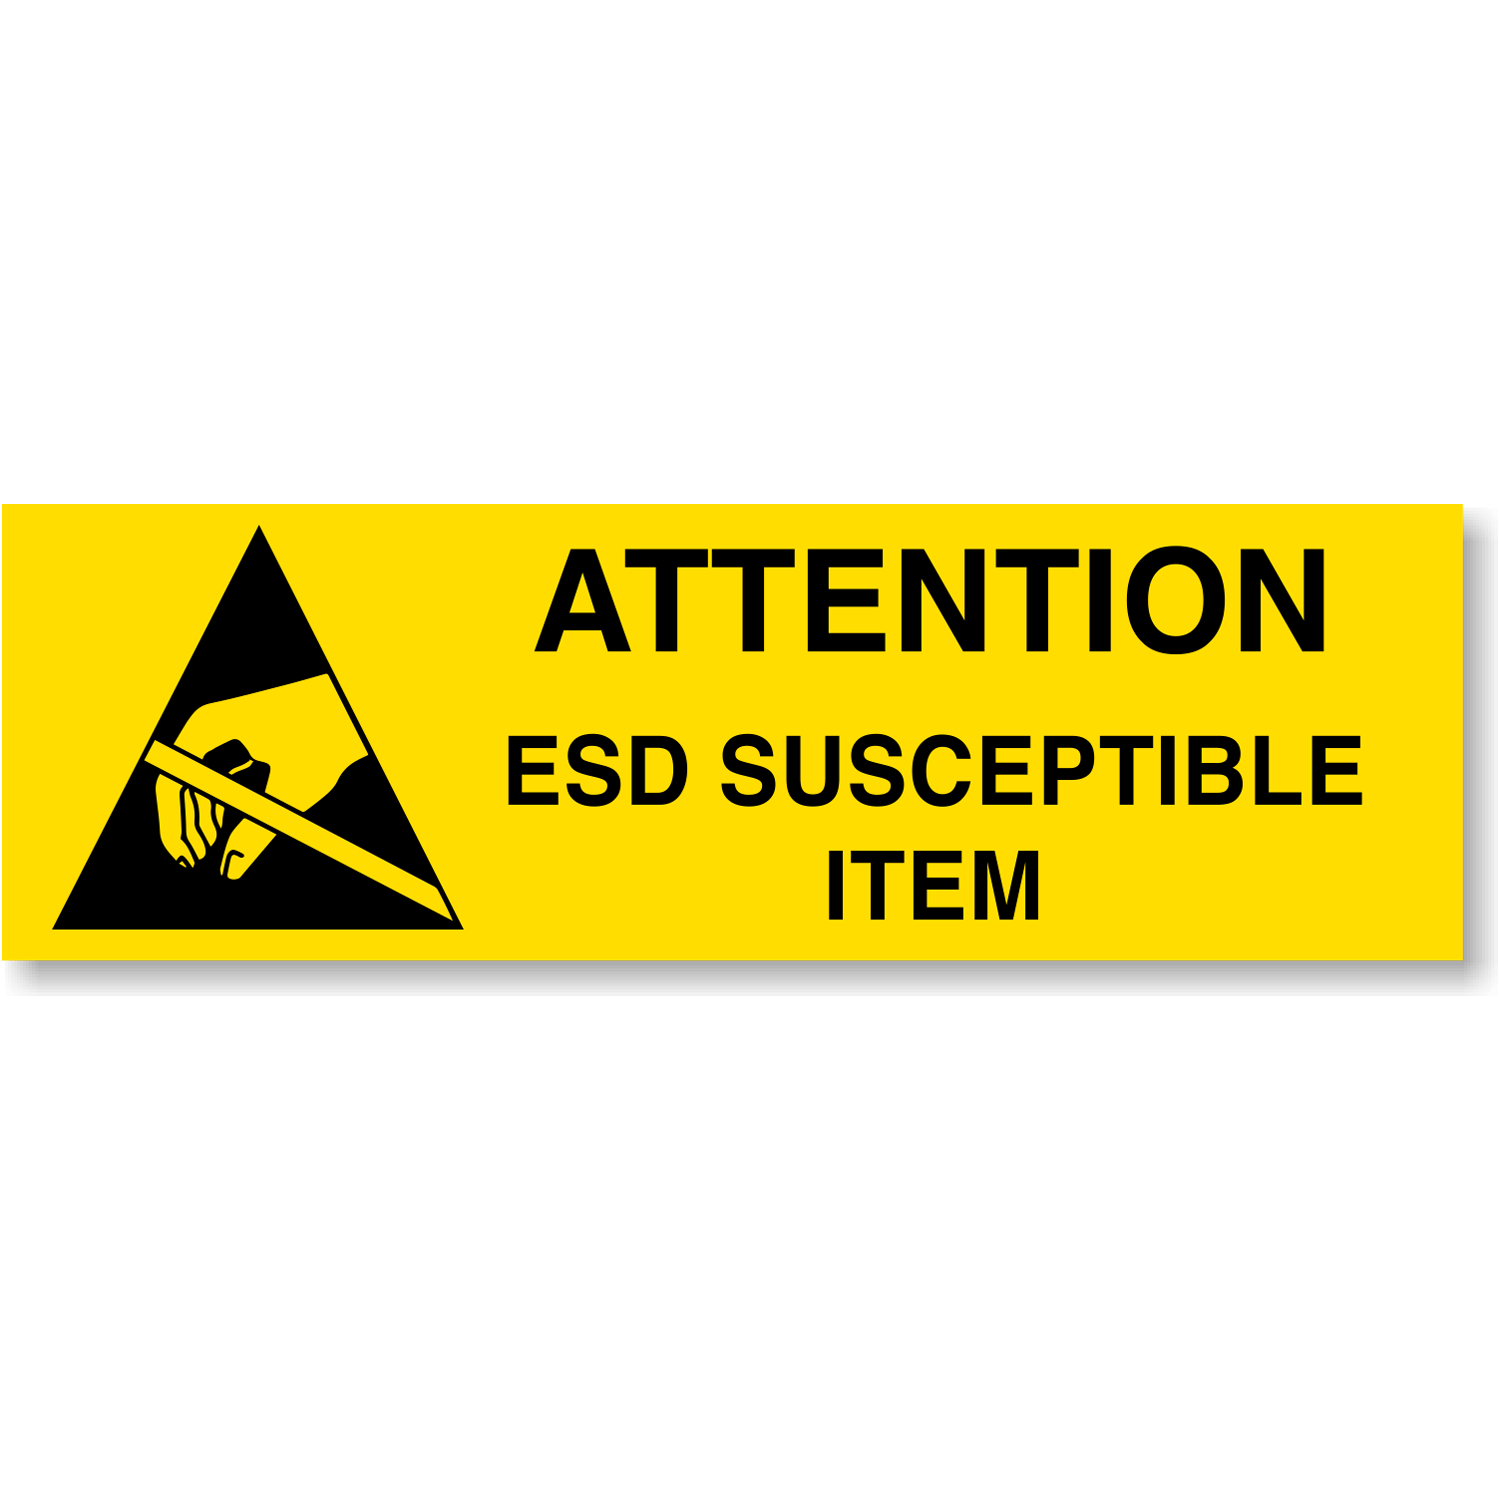 ROLL 800 X-23381 WARNING LABELS 2 x 1" ATTENTION ELECTROSTATIC SENSITIVE DEVICES 